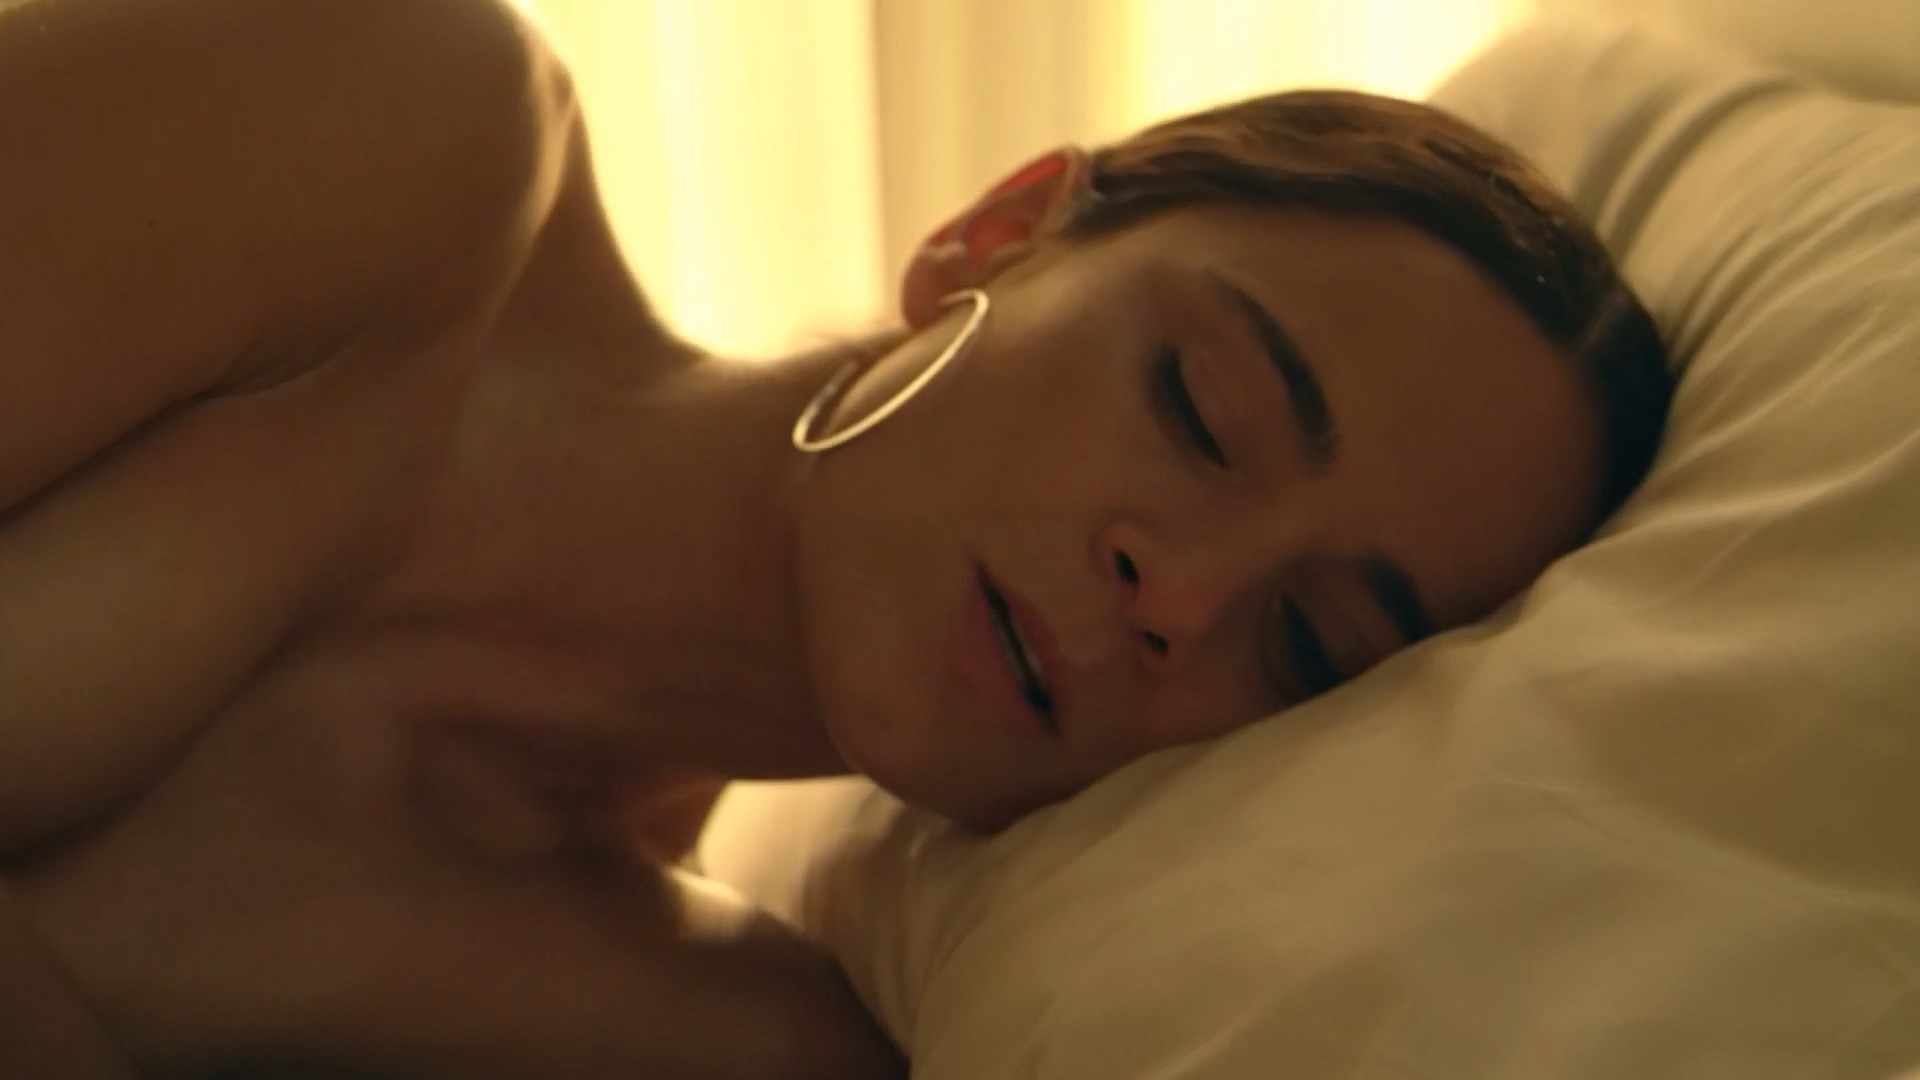 Queen of the south nude scenes